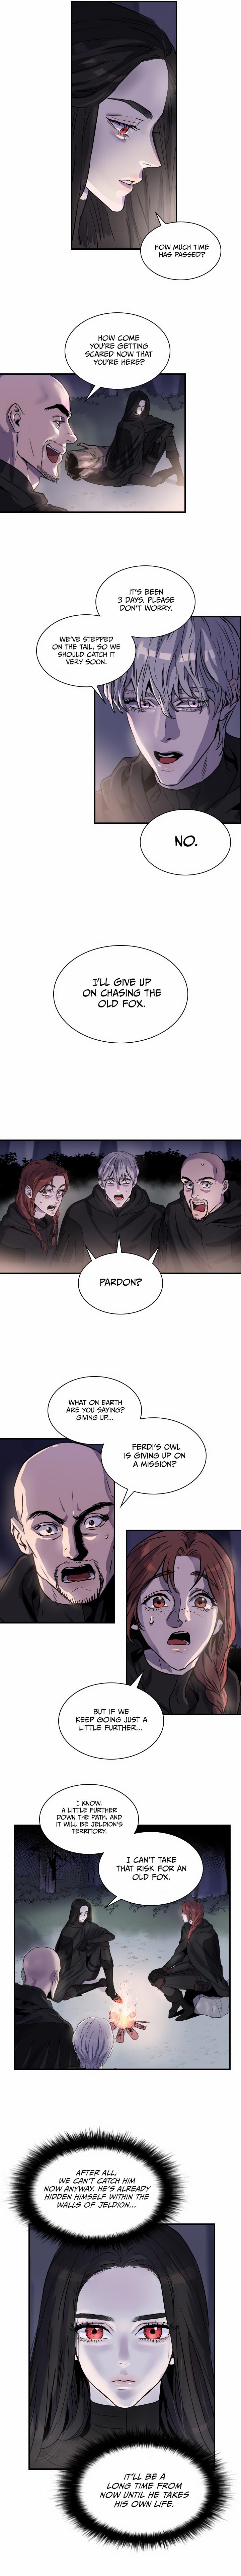 Aideen - Chapter 2 Page 7